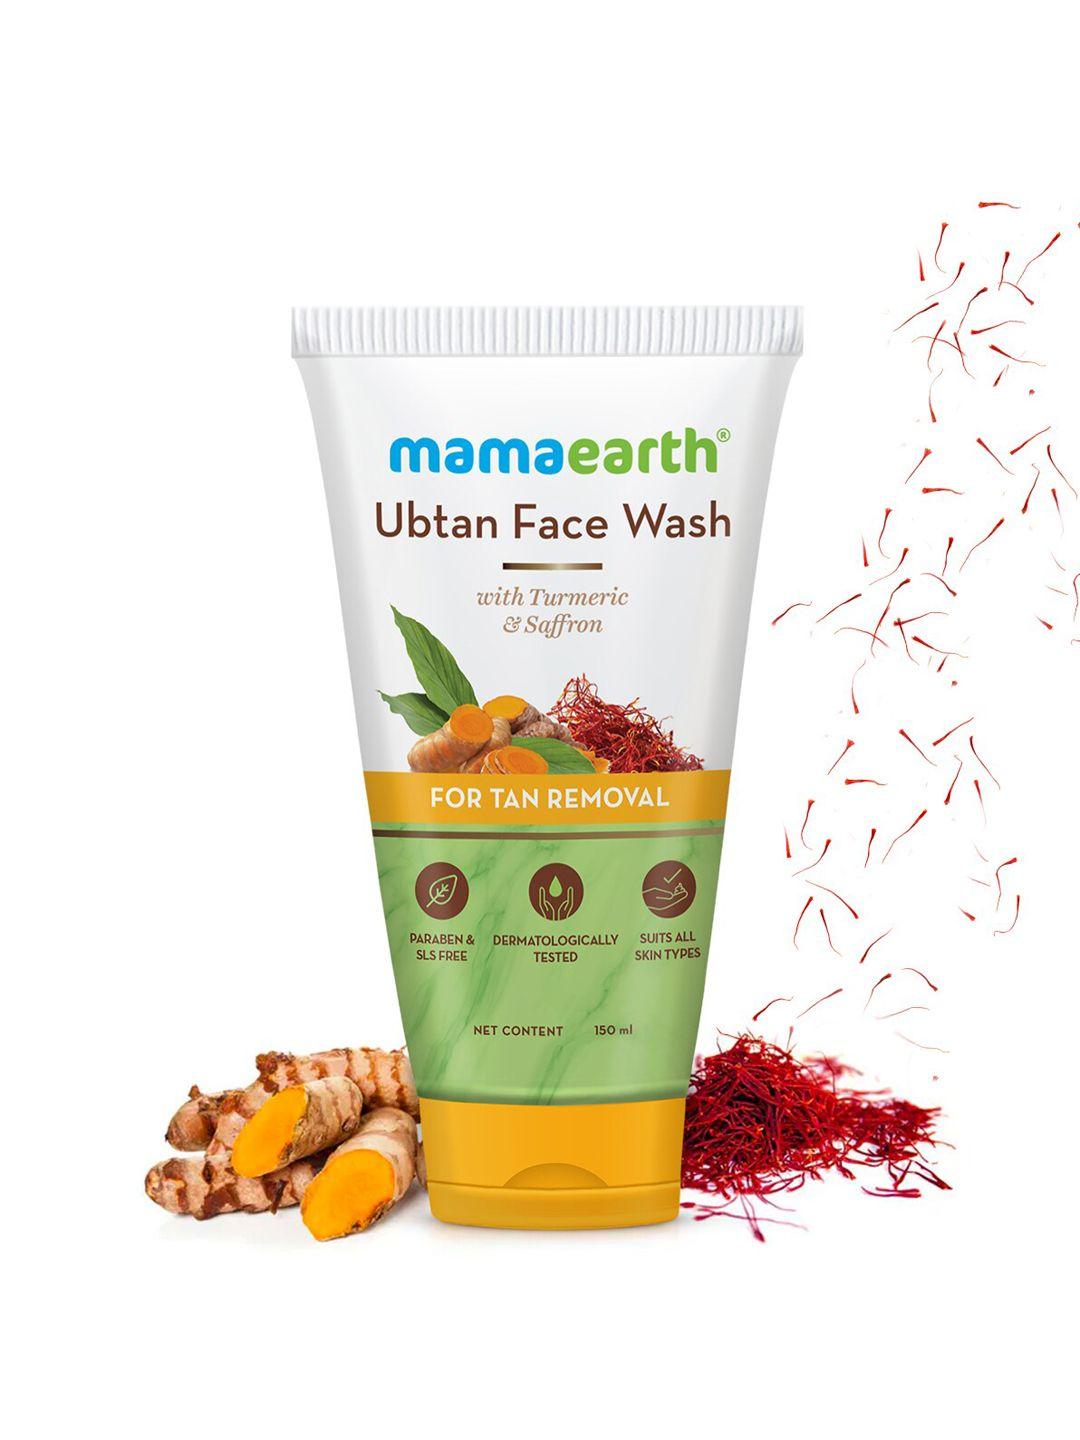 mamaearth ubtan face wash with turmeric & saffron for tan removal - 150ml